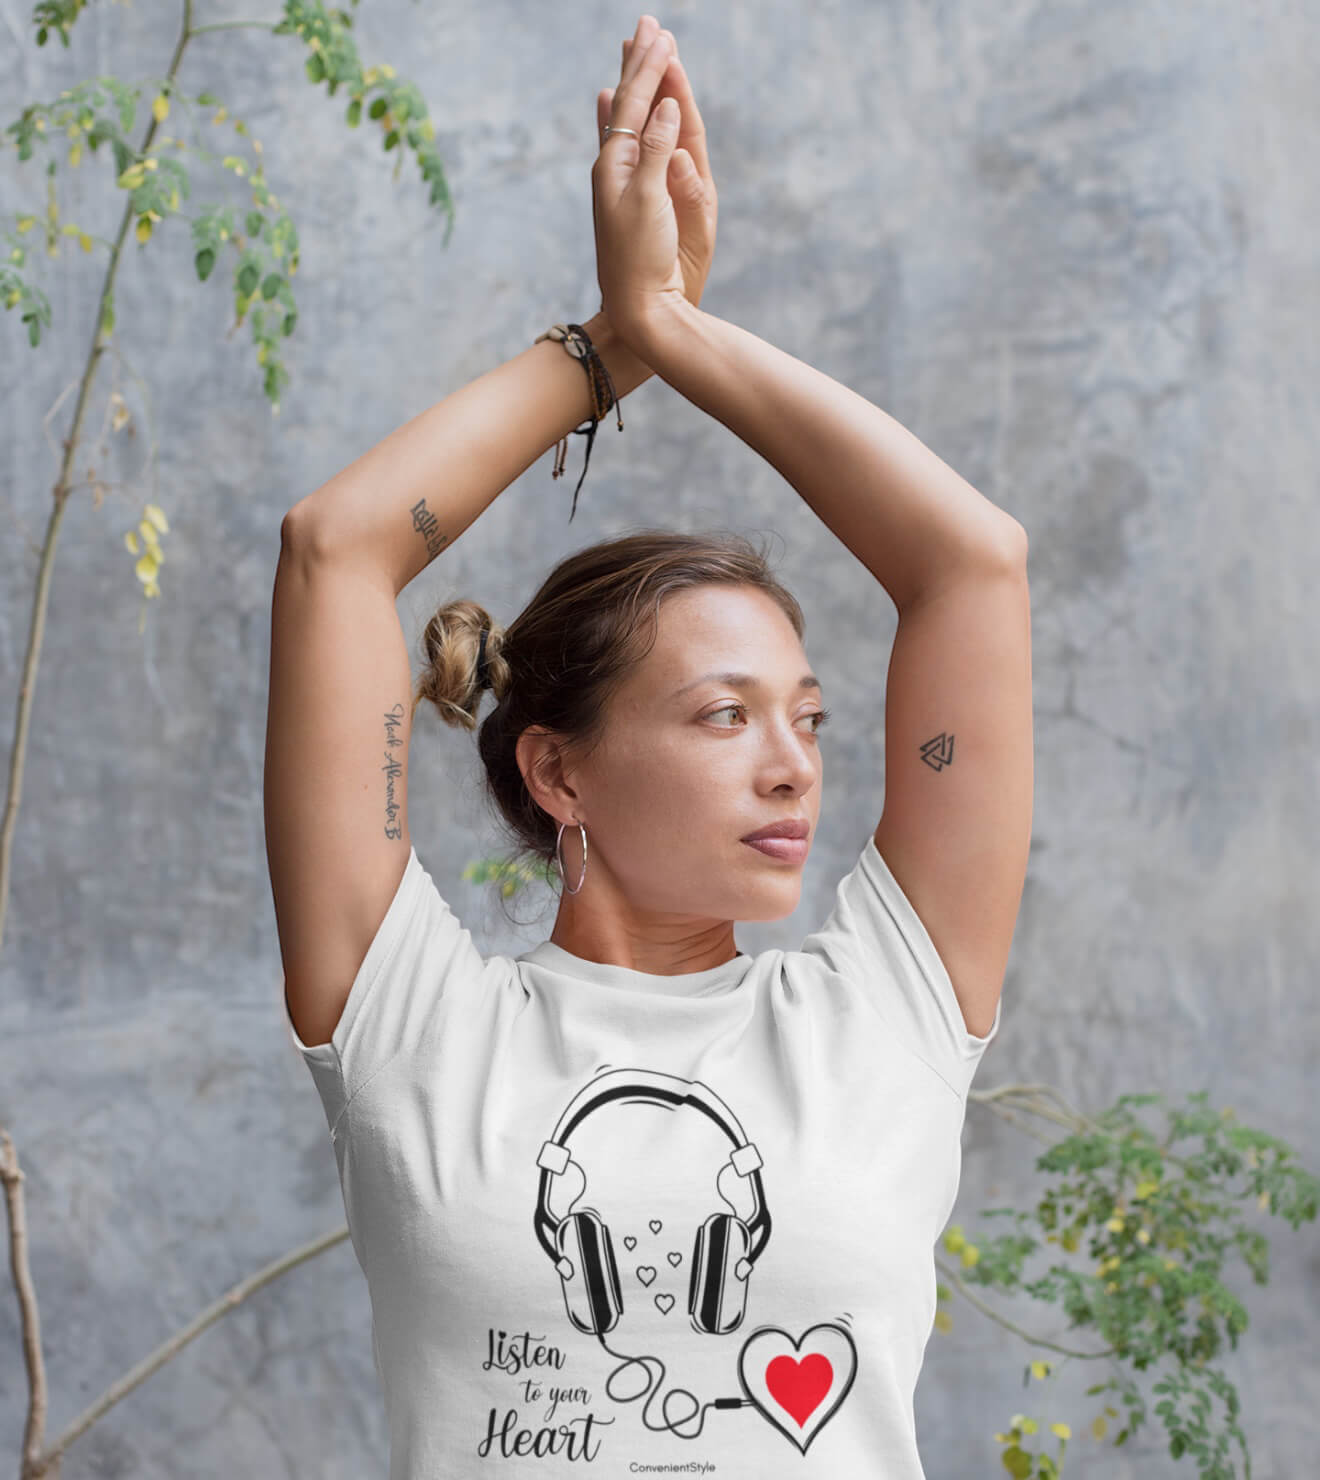 listen-to-your-heart-shirt-yoga-pose